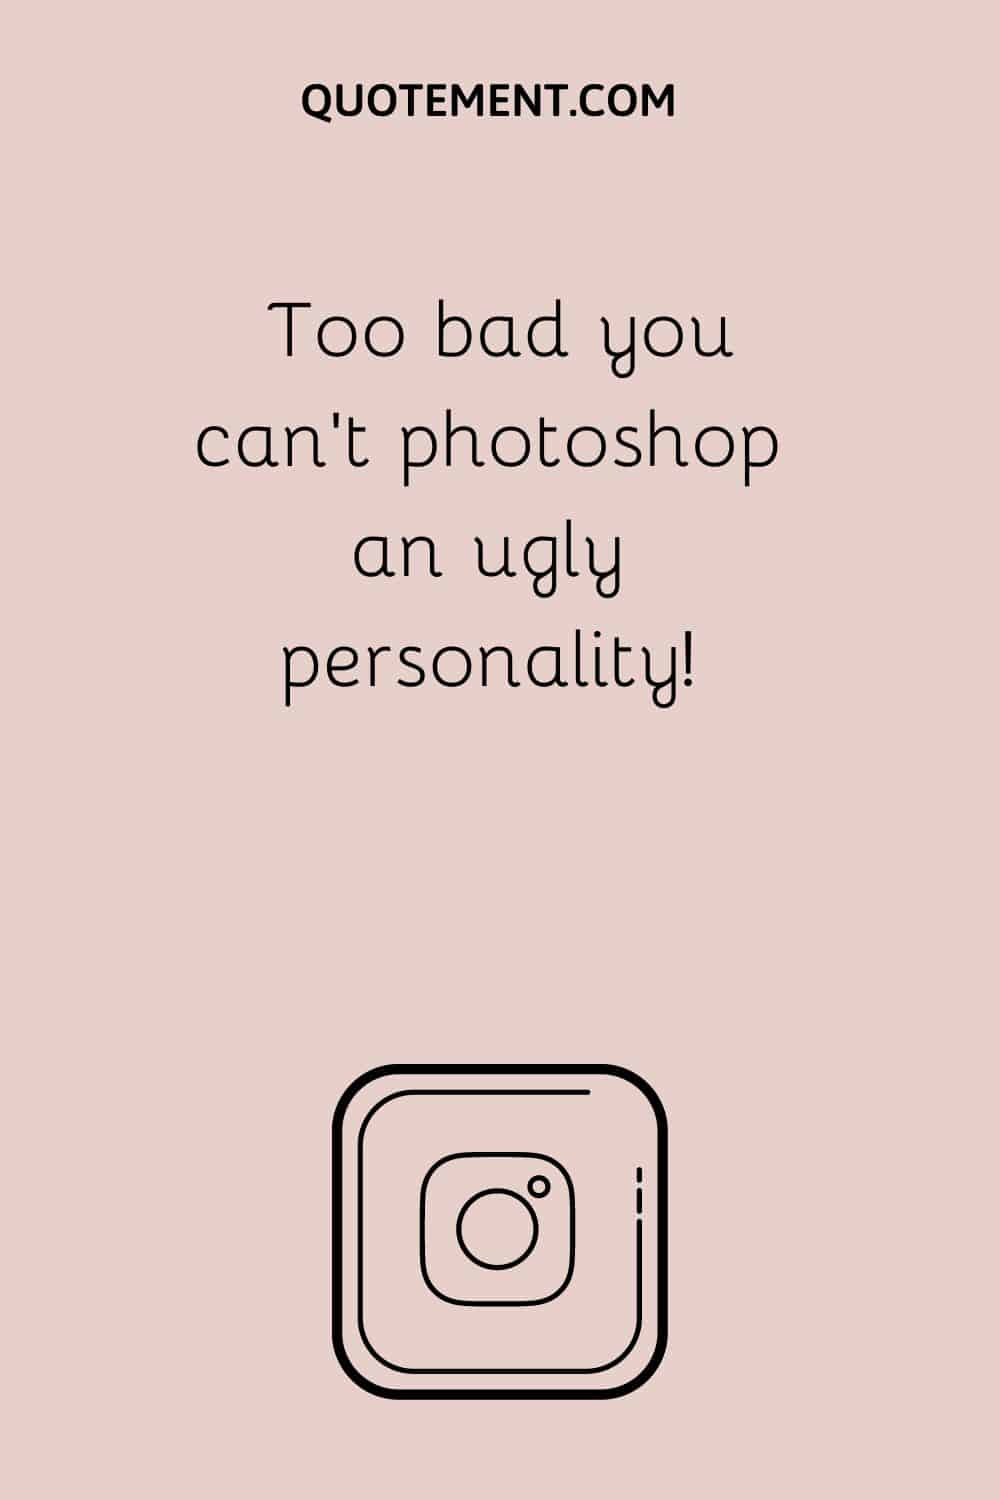 Too bad you can’t photoshop an ugly personality